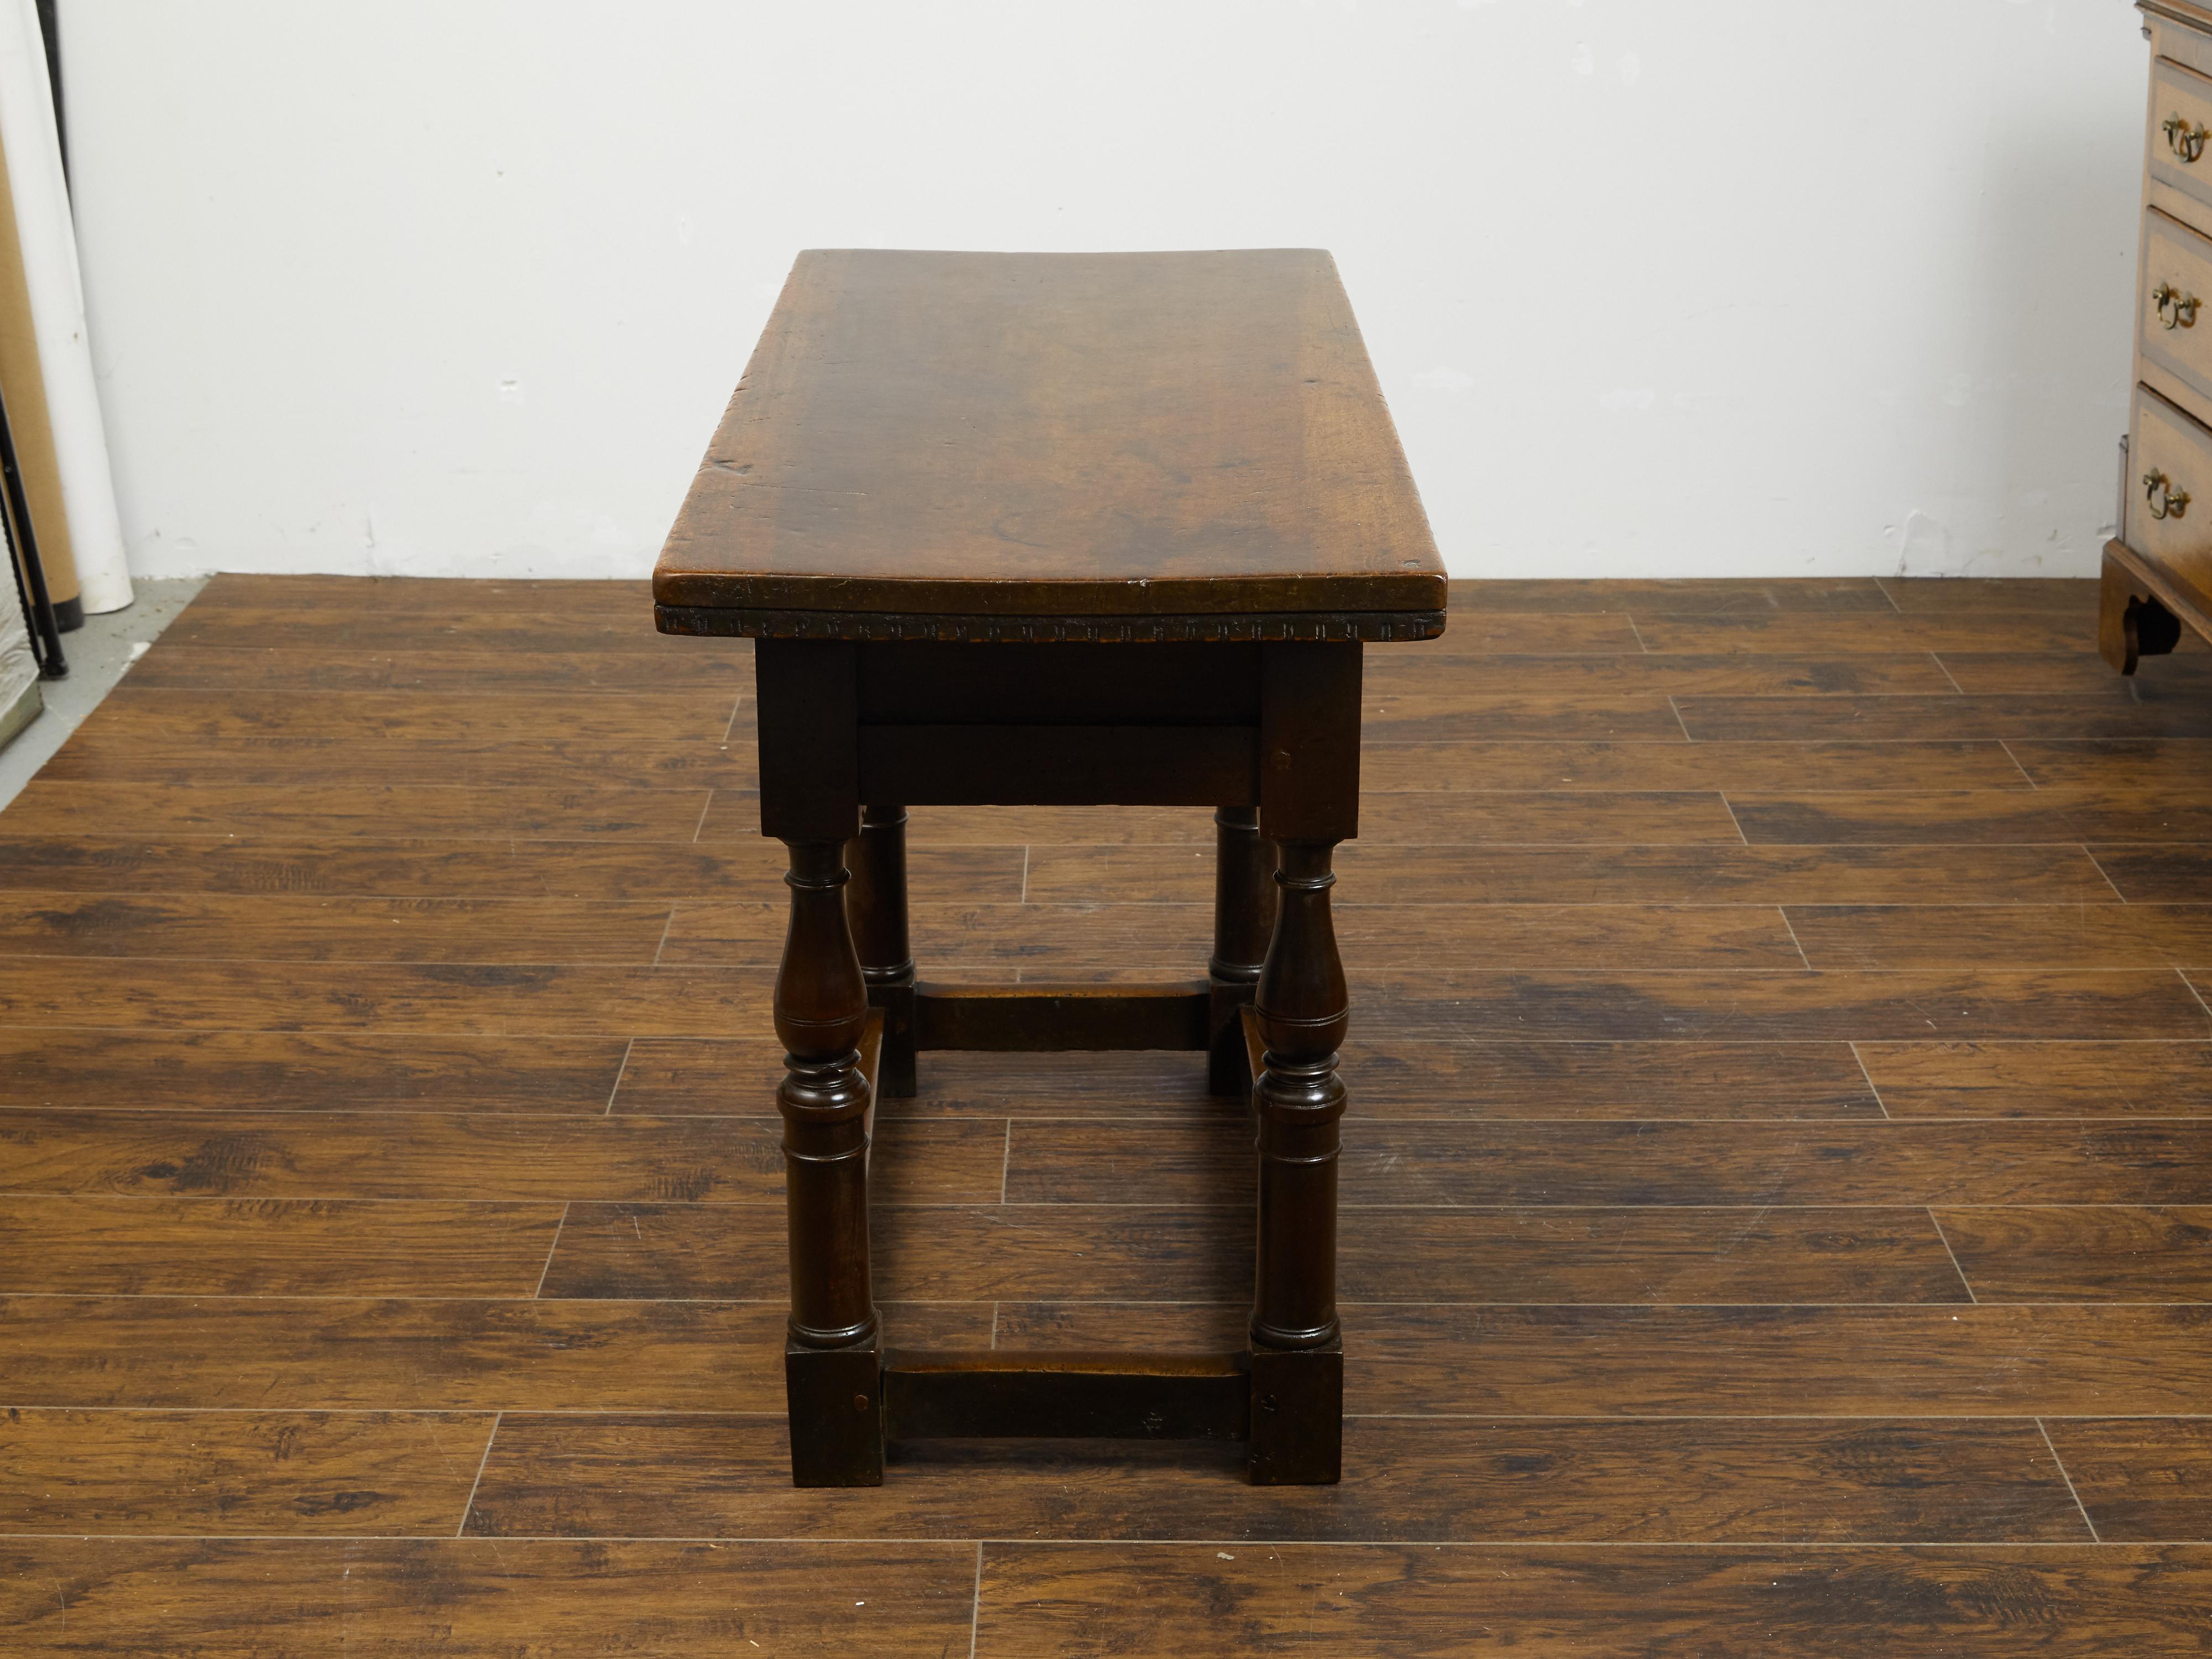 Italian 1800s Walnut Table with Two Drawers, Turned Legs and Dentil Molding 7